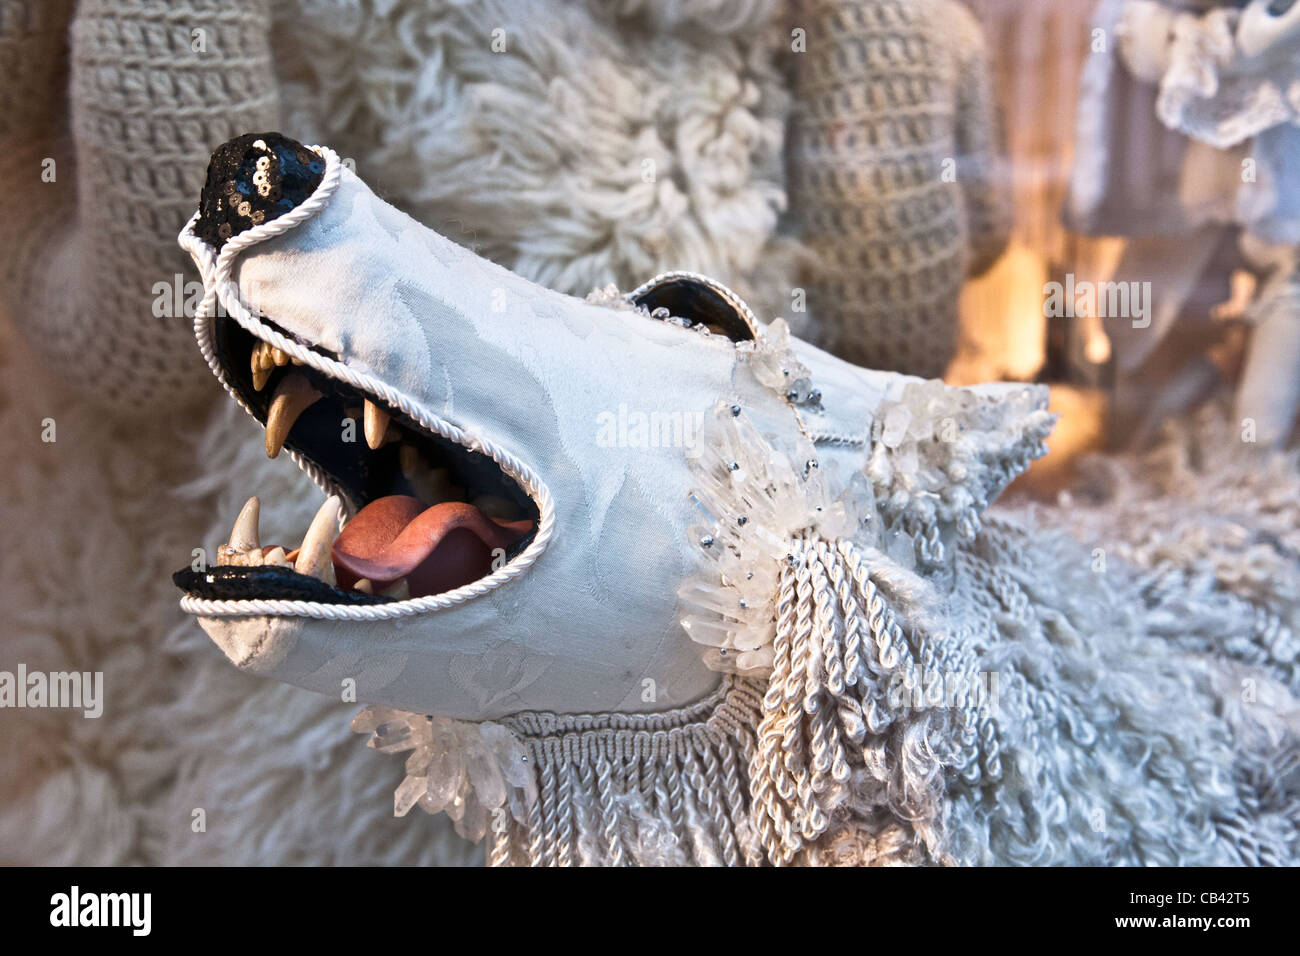 muzzle of wolf with big teeth & pink tongue peers from under white jeweled sheeps clothing in Bergdorf Goodman window New York Stock Photo